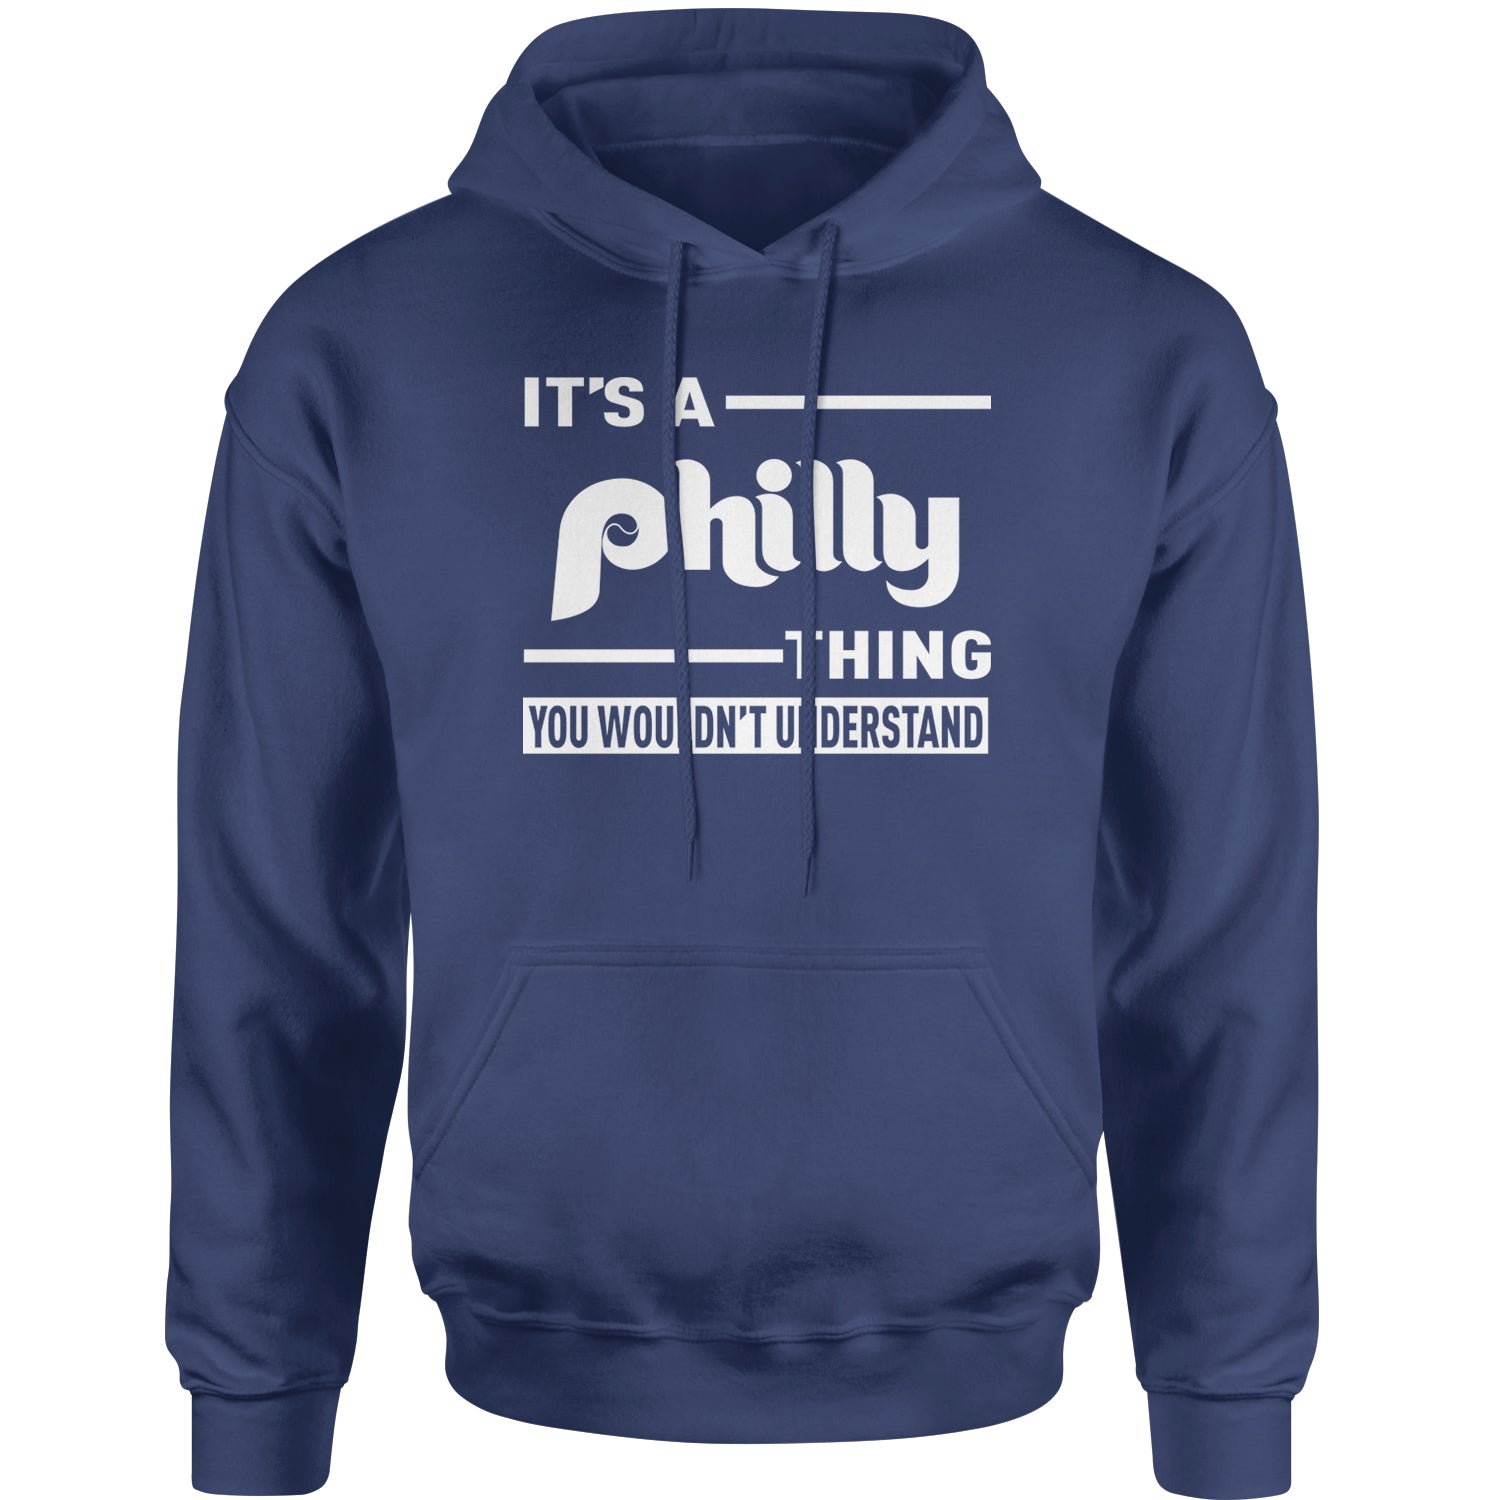 It's A Philly Thing, You Wouldn't Understand Adult Hoodie Sweatshirt baseball, filly, football, jawn, morgan, Philadelphia, philli by Expression Tees